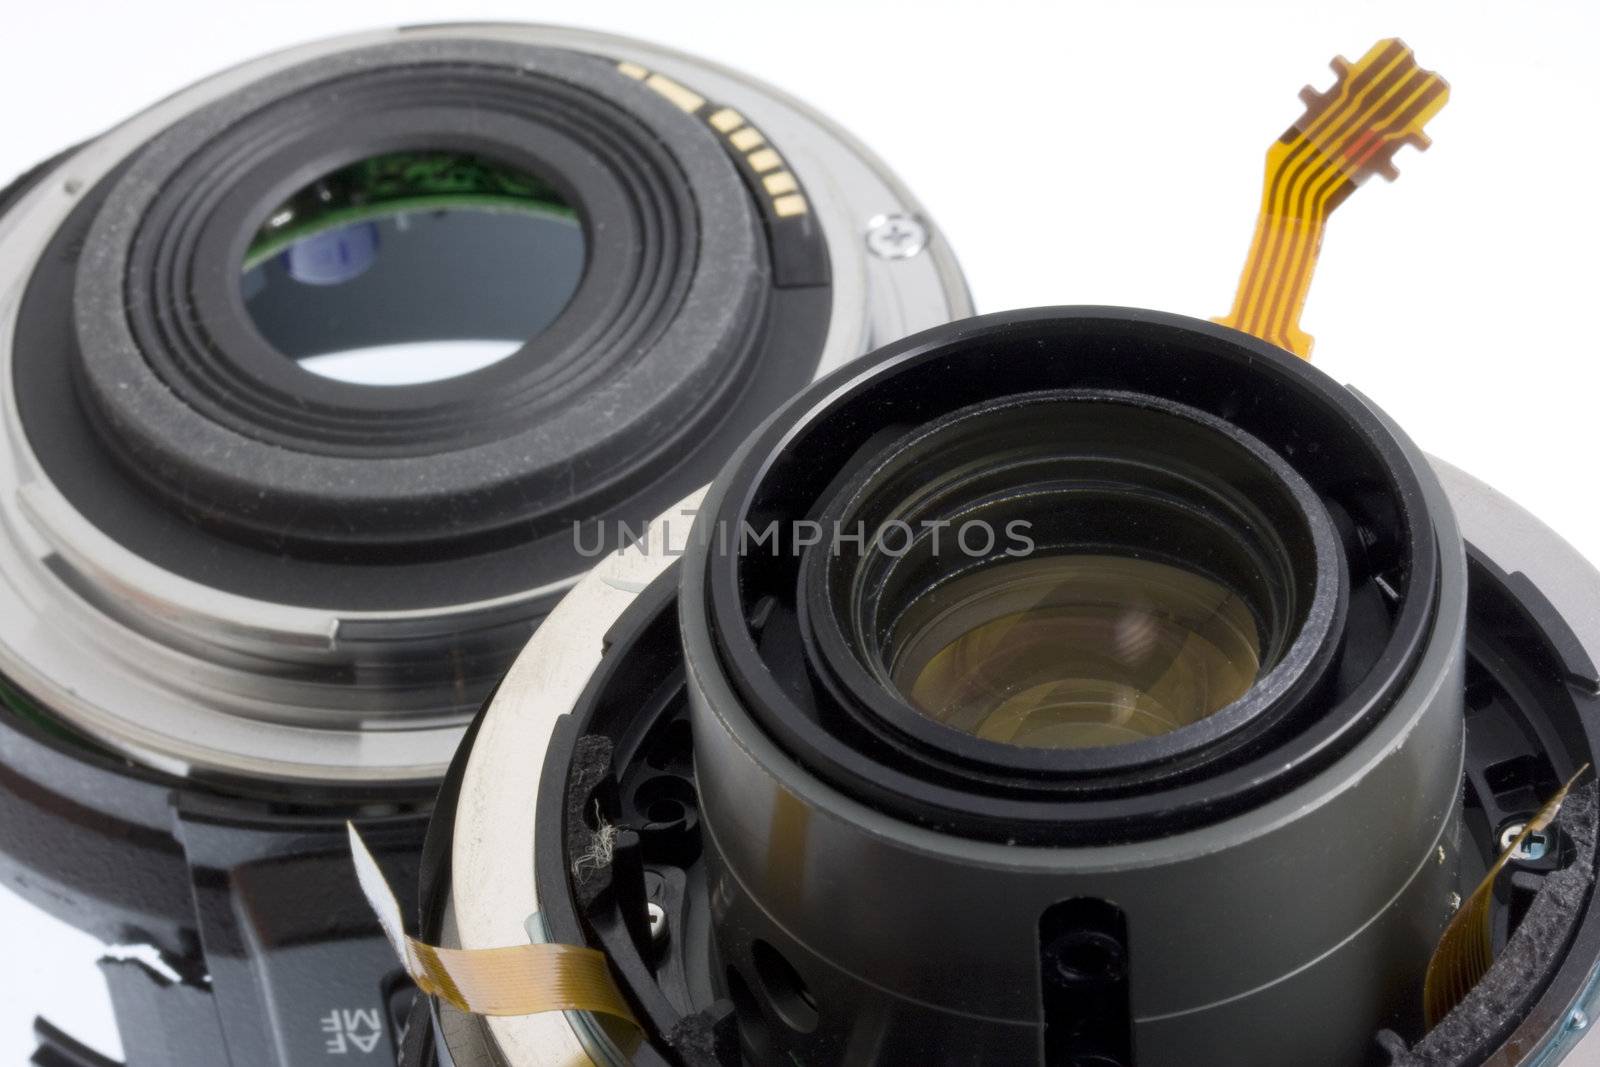 Broken autofocus 60mm lens - two parts with visible eletronic circuits